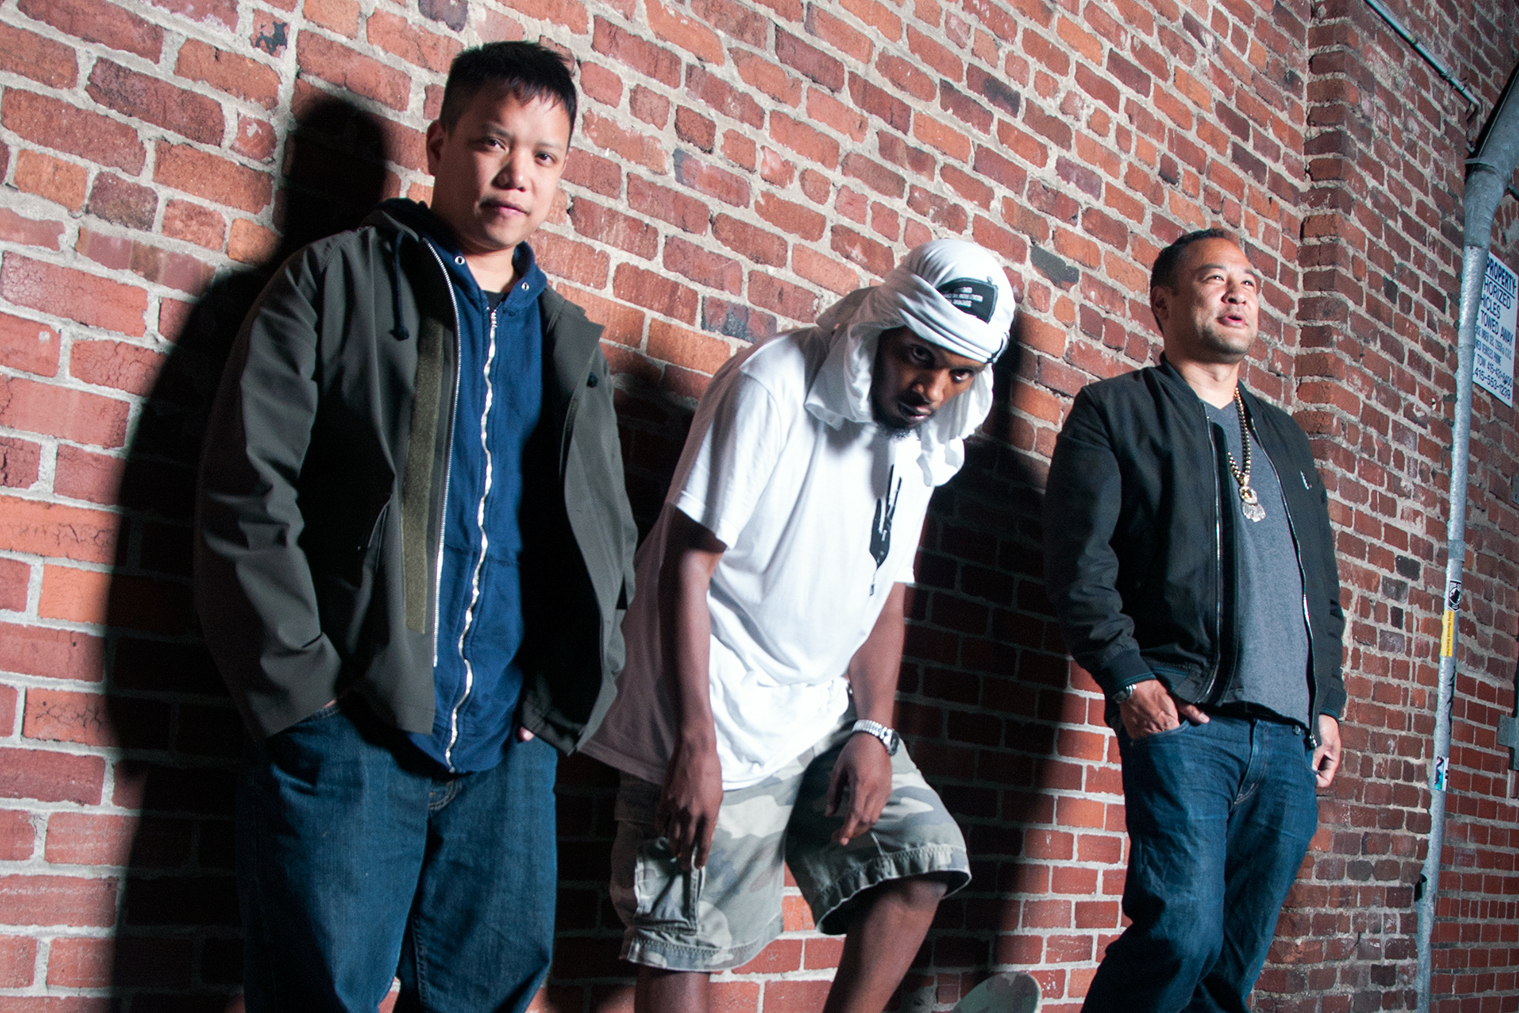 Deltron 3030 is coming to Madison!